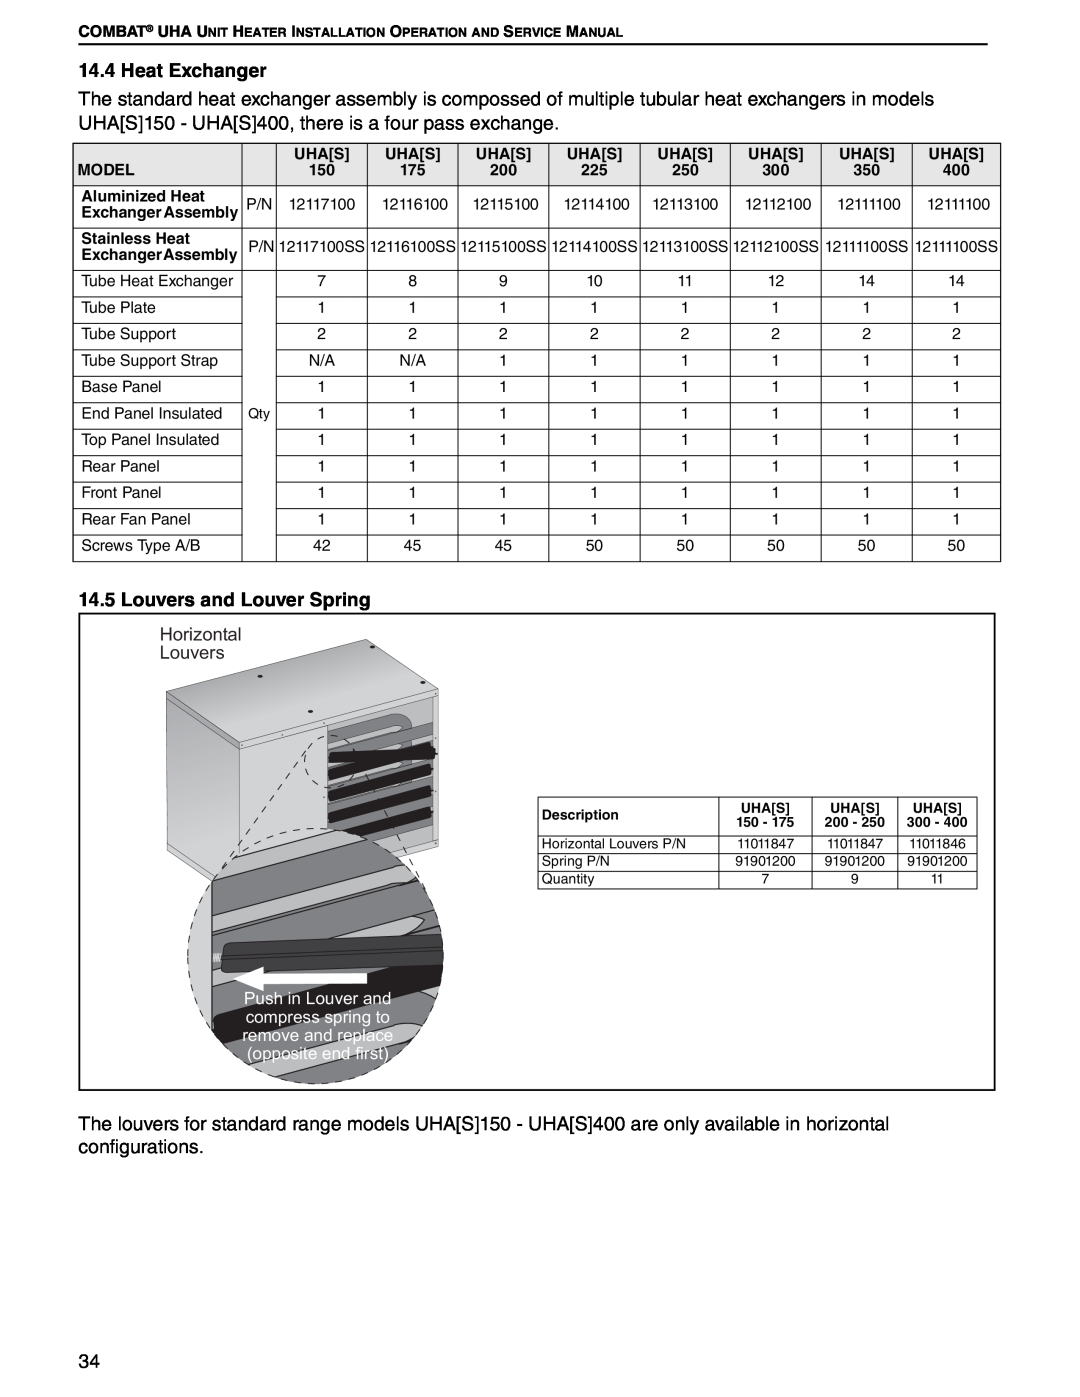 Roberts Gorden 175, 200, 350, 150, 400, 300, 225 250 service manual Heat Exchanger, Louvers and Louver Spring 